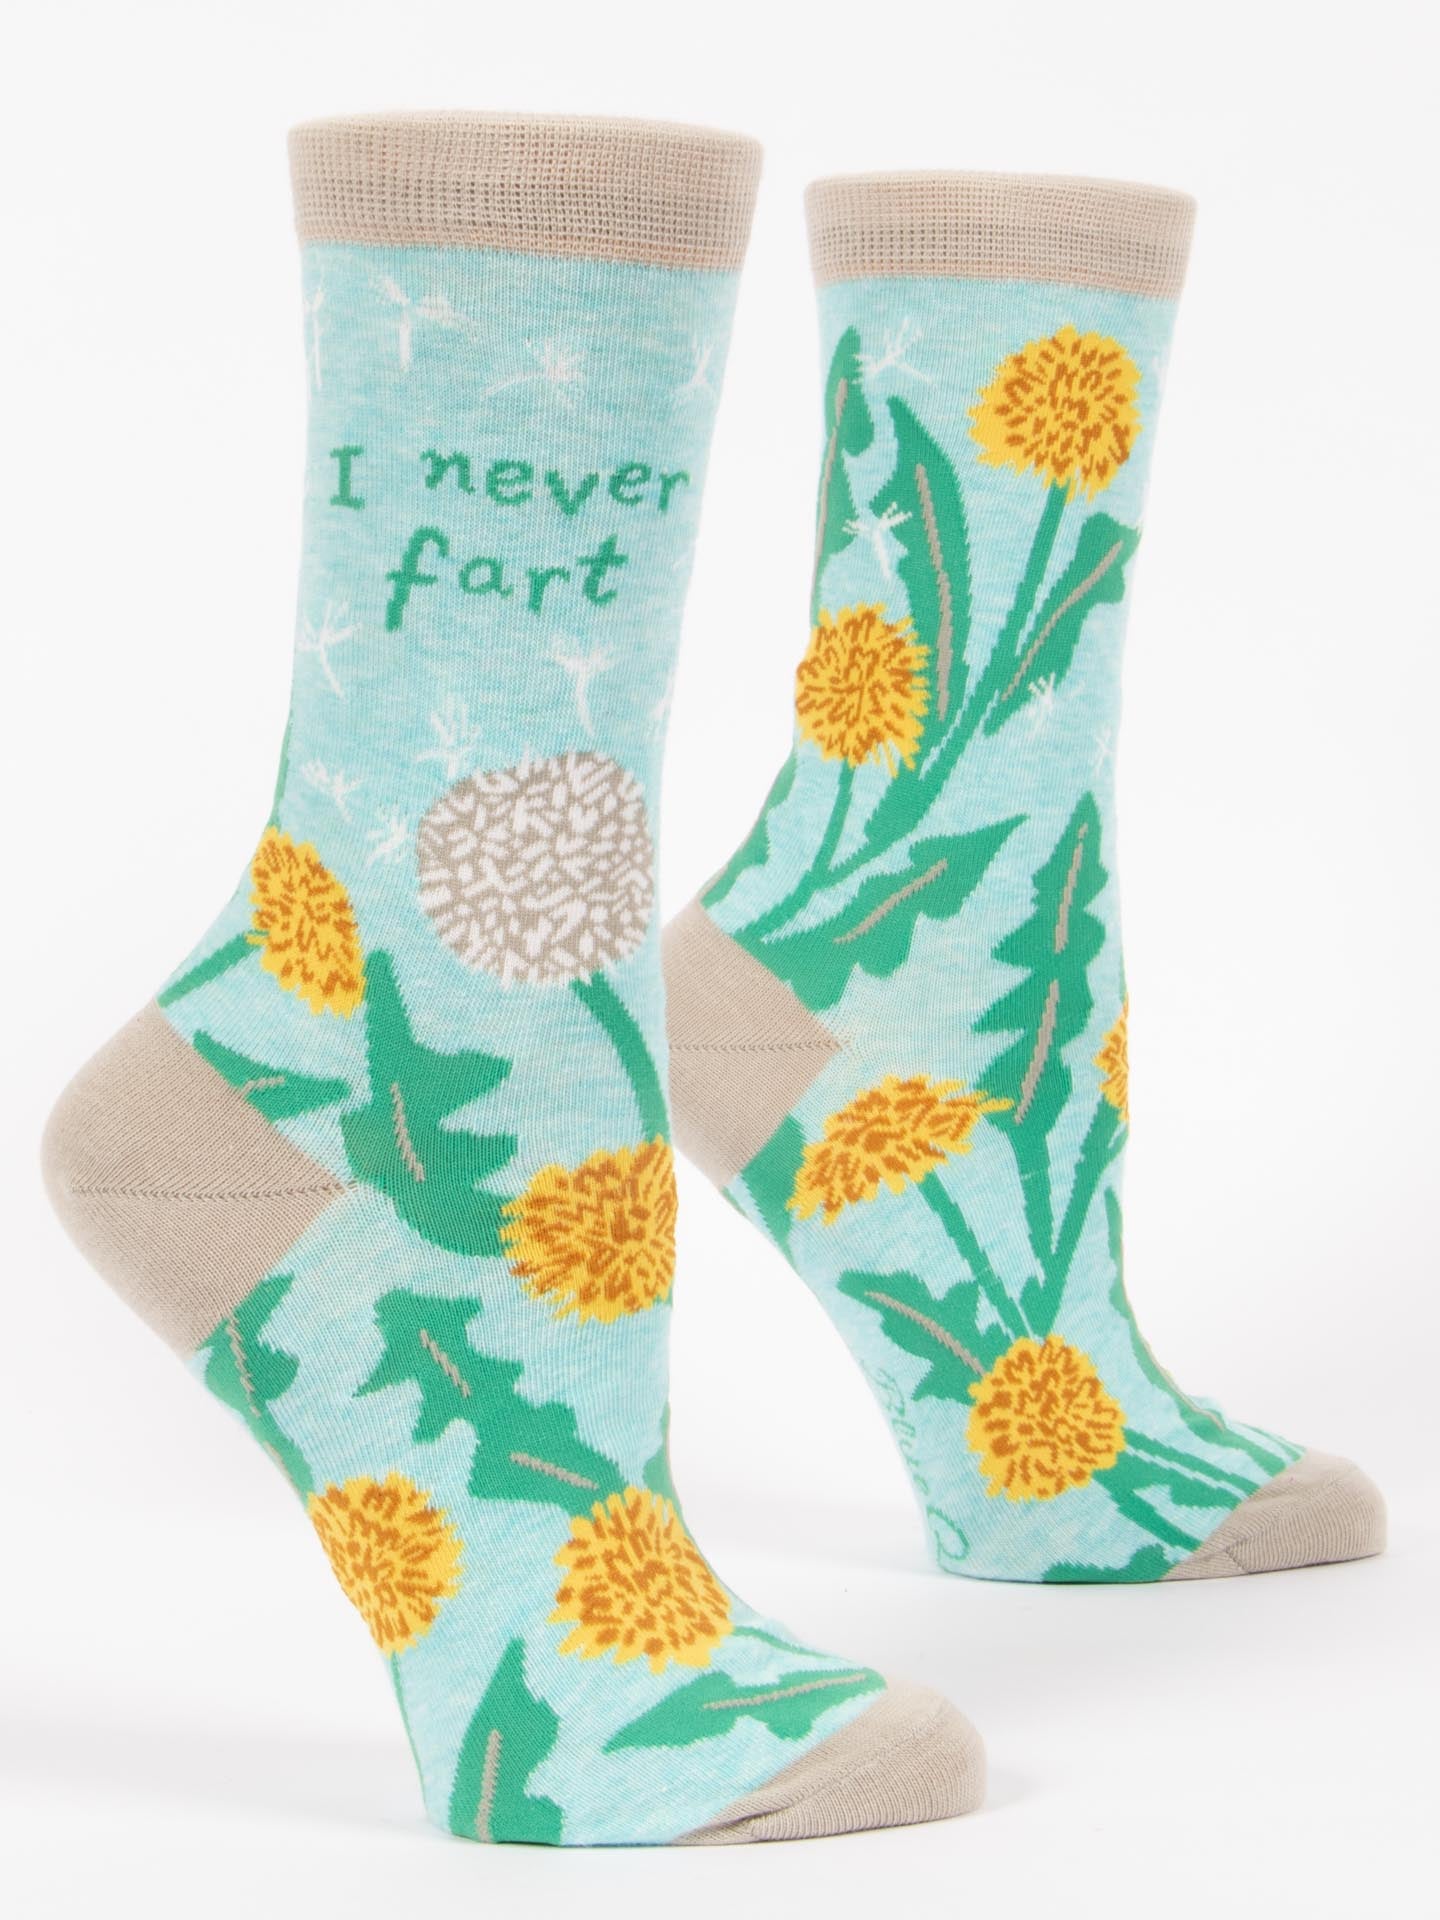 Shown on leg forms, a pair of light blue Blue Q socks with a grey heel, toe, and cuff. The feature a dandelion and puffball design on the foot and the phrase, 